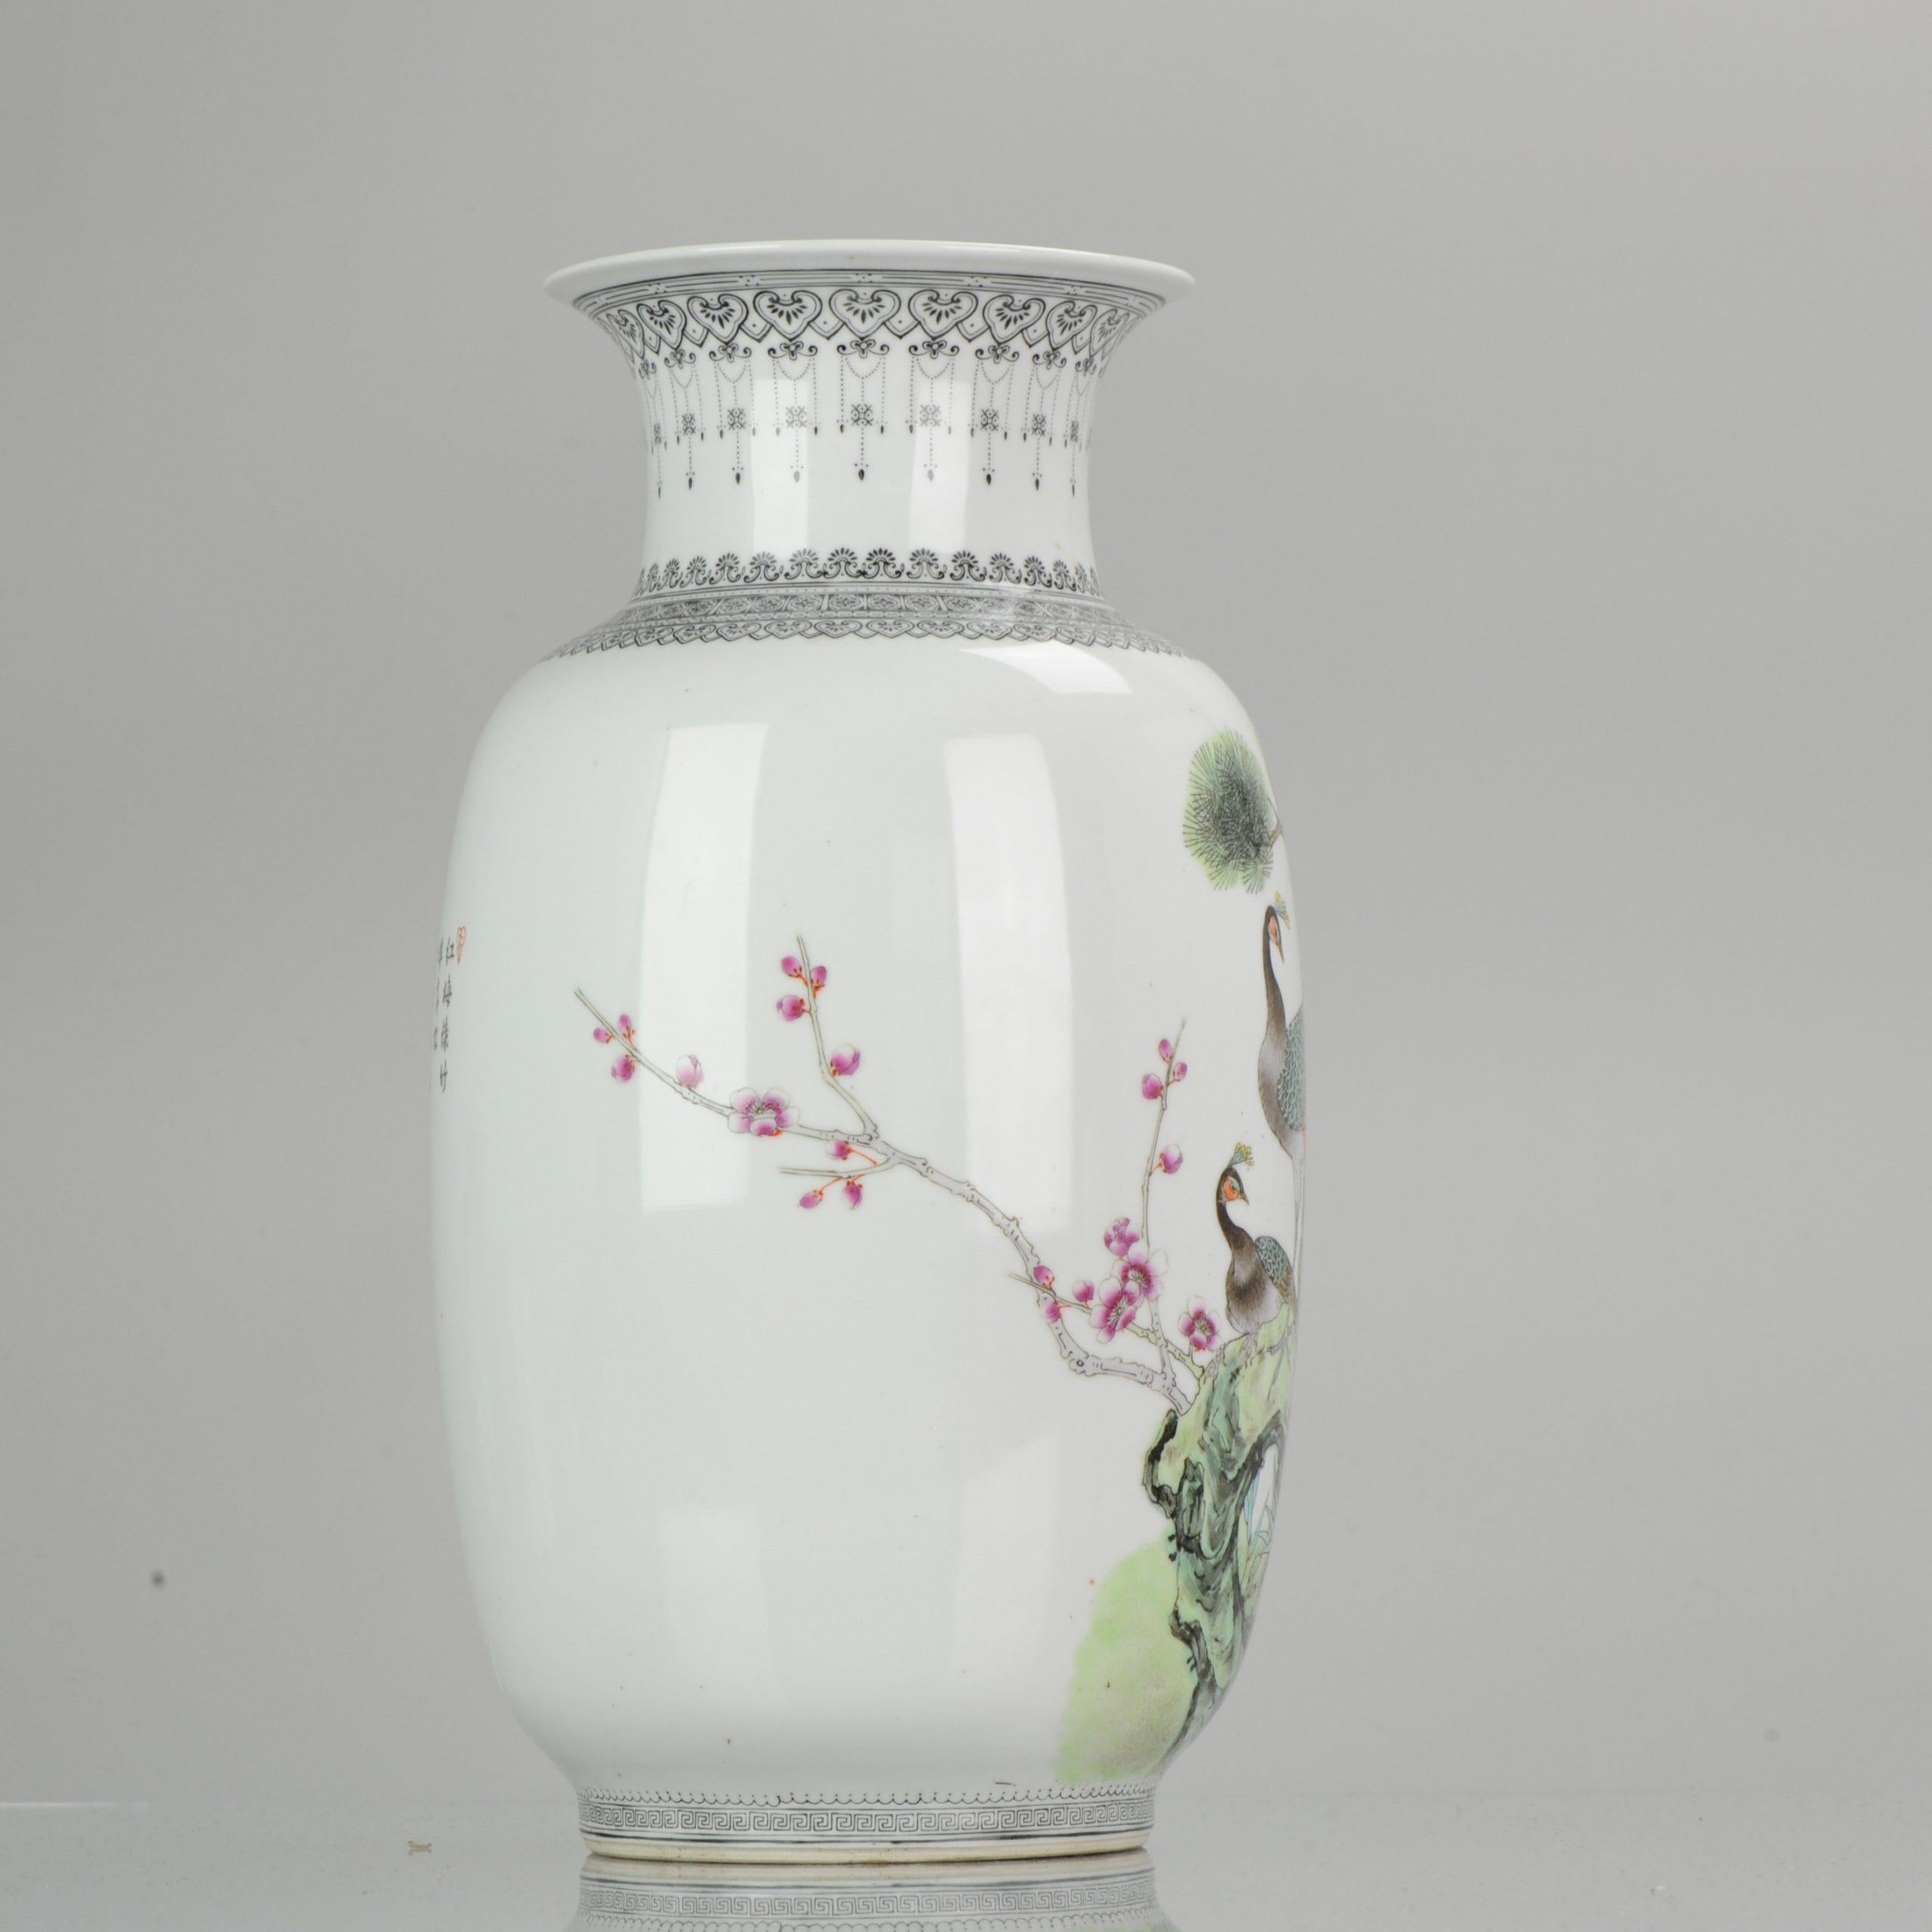 Vintage China 20th Century Peacock Vase Chinese Porcelain PROC In Excellent Condition For Sale In Amsterdam, Noord Holland